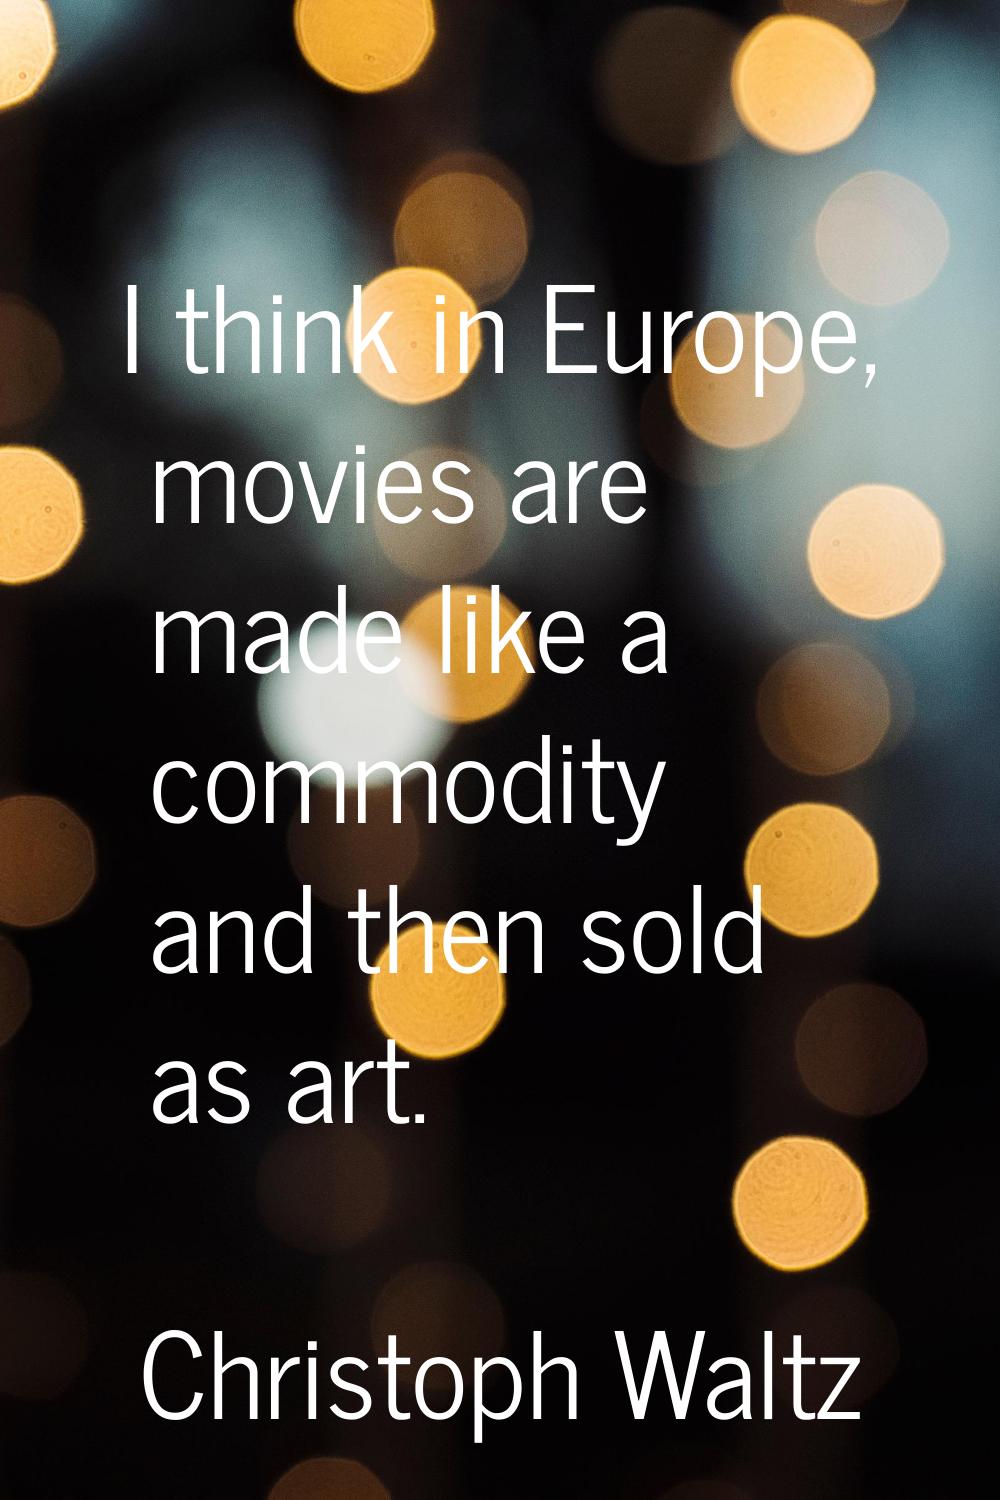 I think in Europe, movies are made like a commodity and then sold as art.